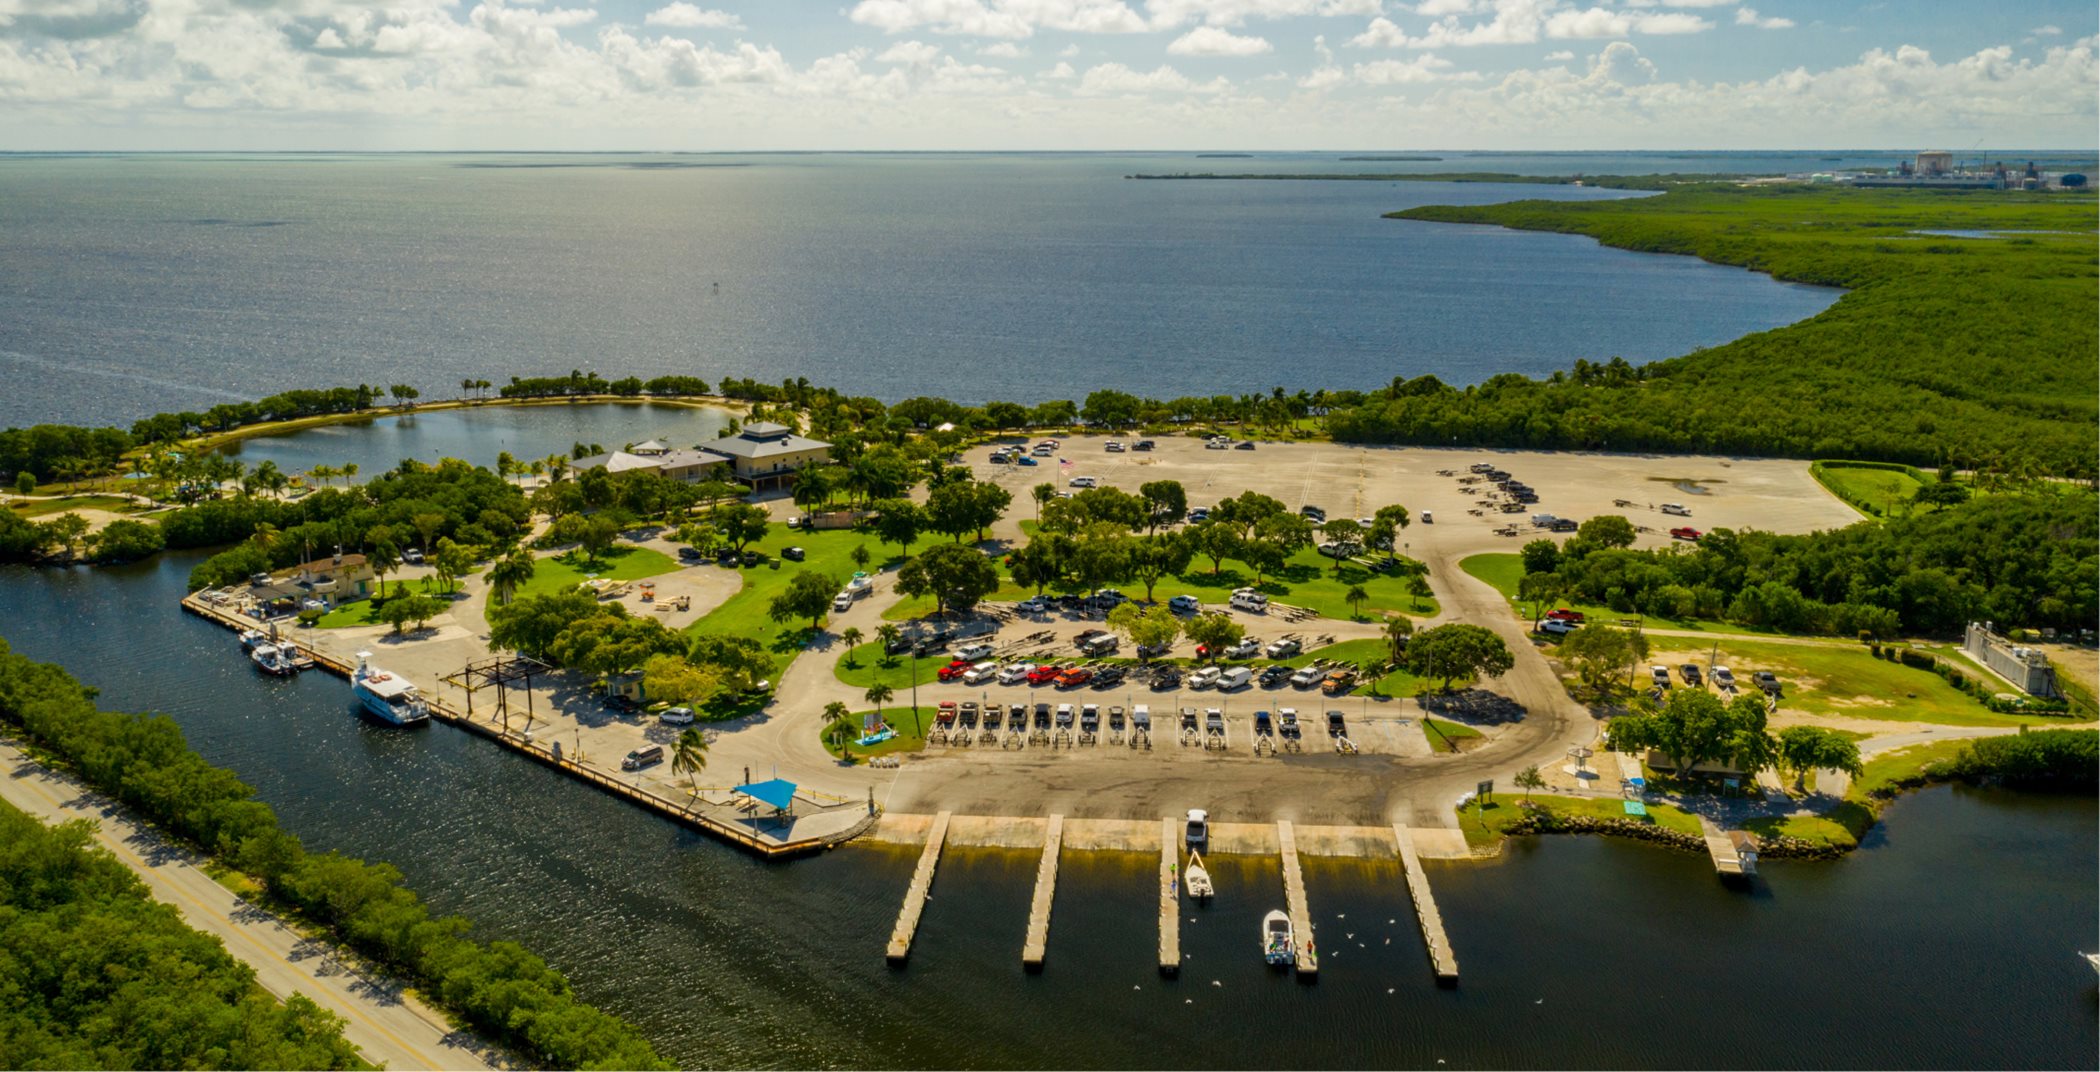 Aerial view of Homestead Bayfront Park